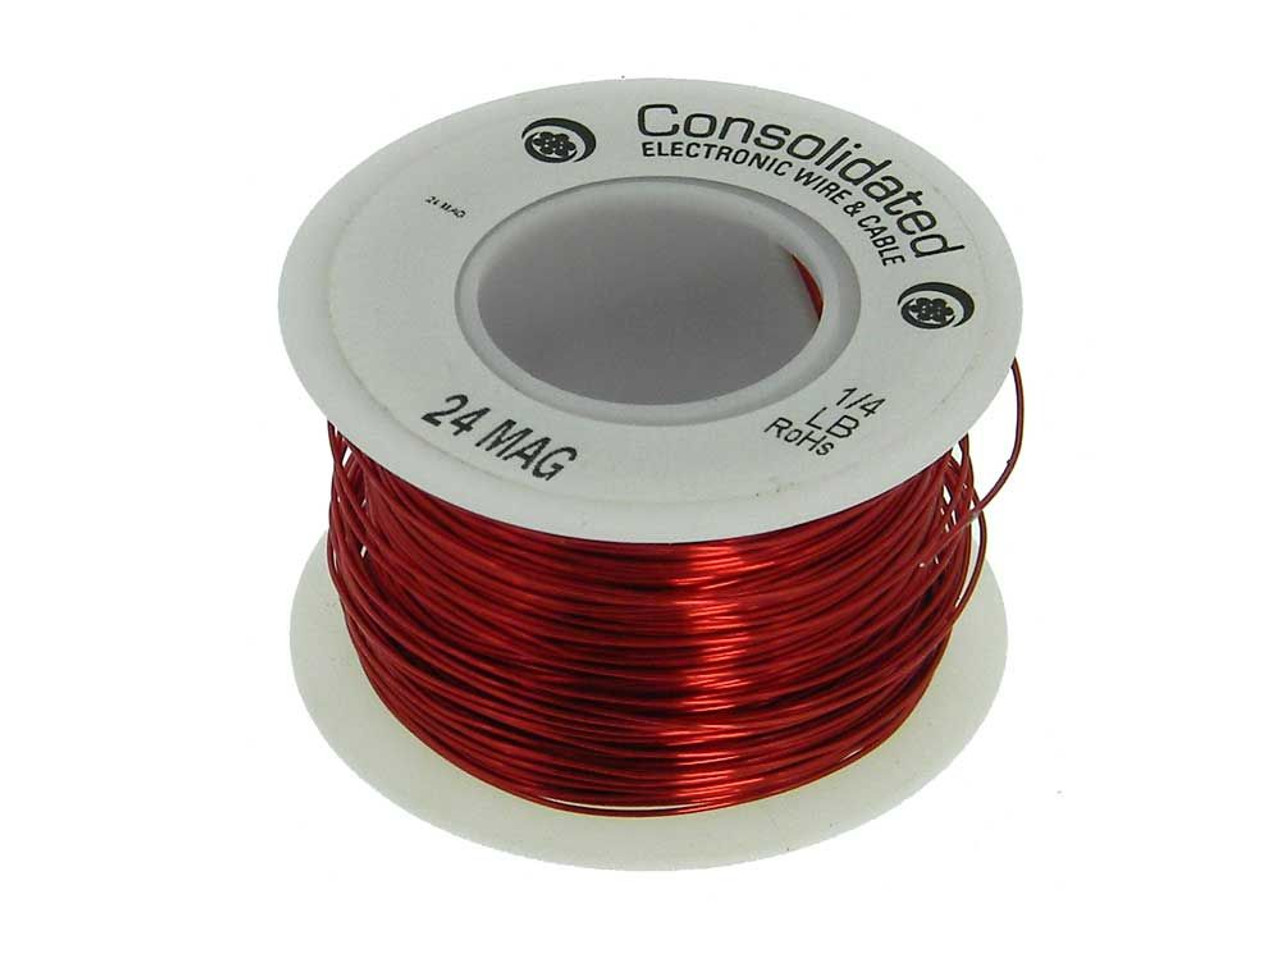 24 AWG Solid Enameled Bare Copper Magnet Wire - 1/4 lb Spool